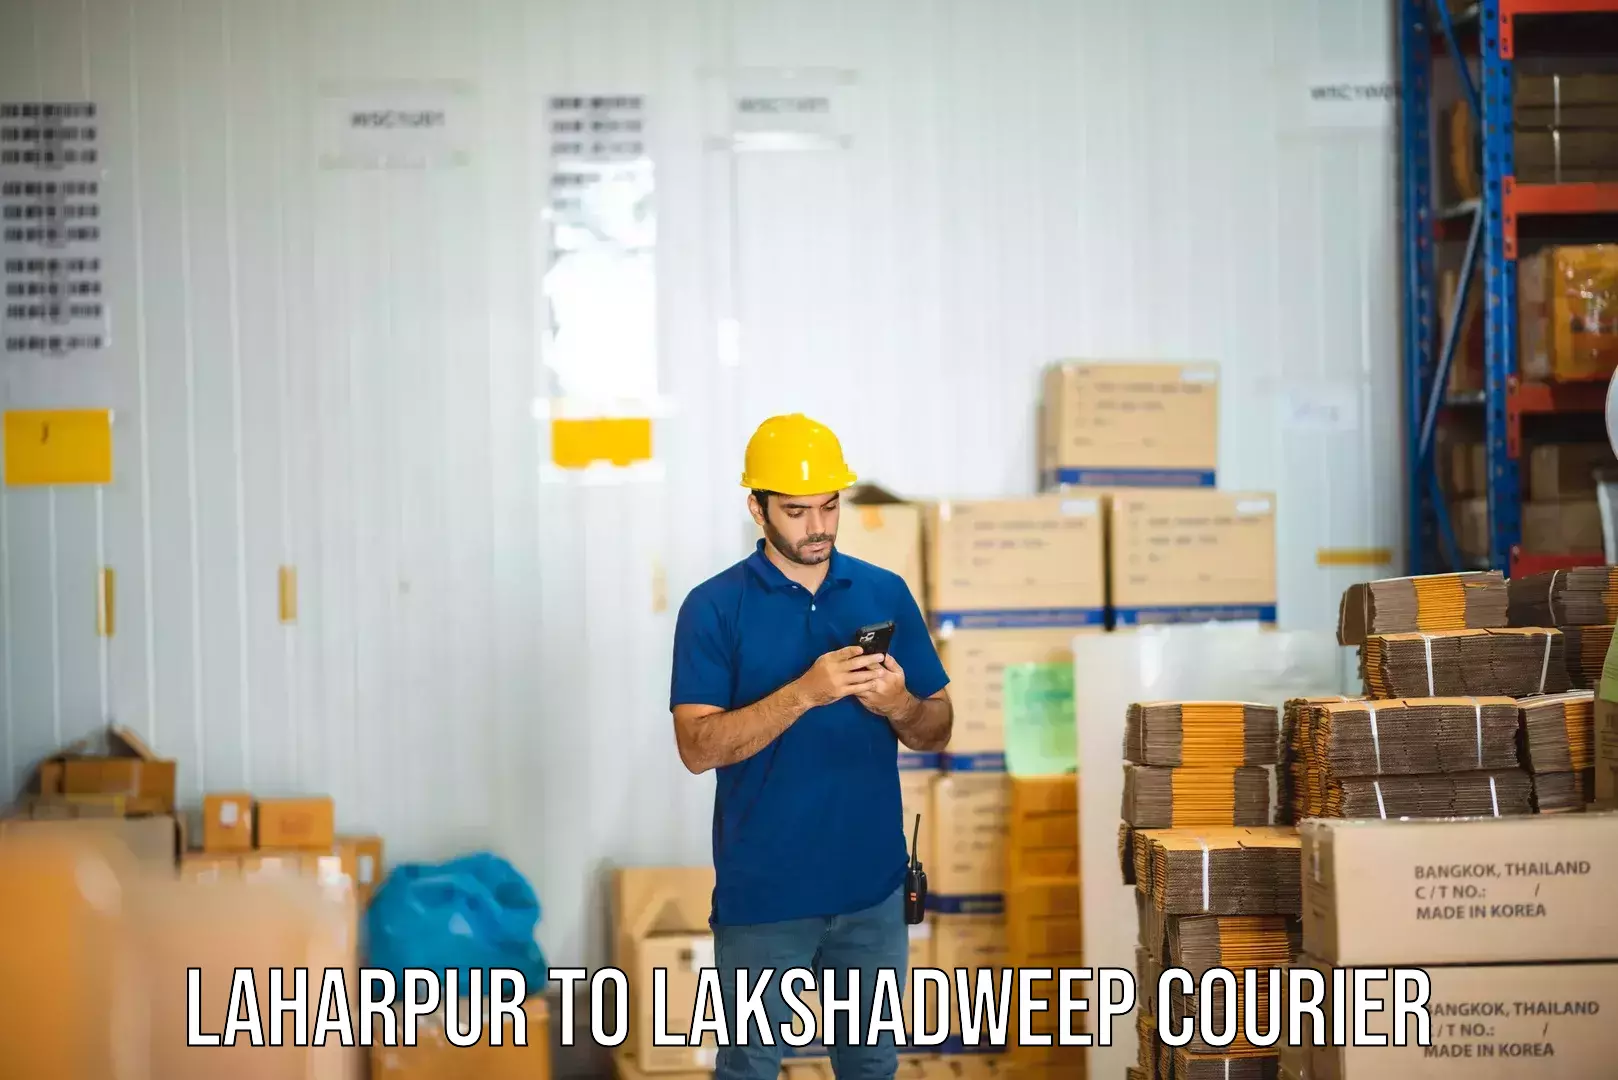 Customizable delivery plans Laharpur to Lakshadweep